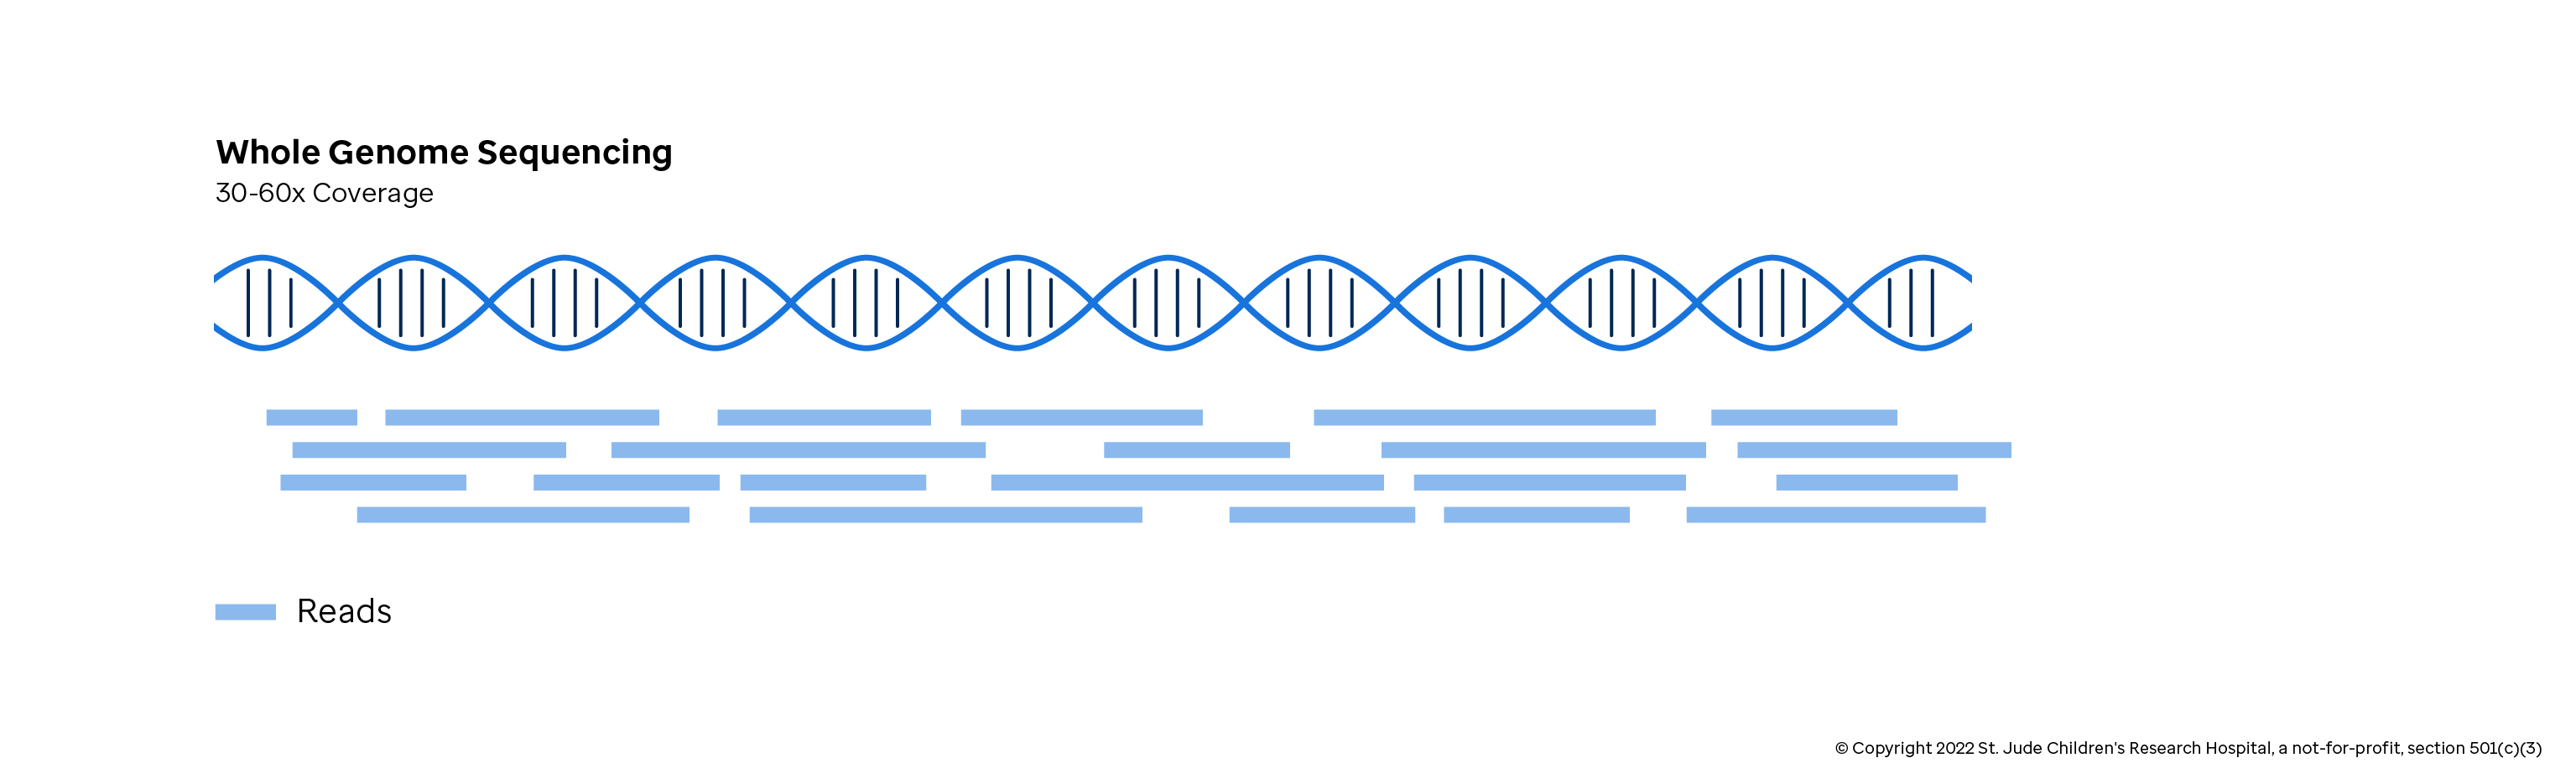 Figure depicting the entire genome being sequenced using NGS.